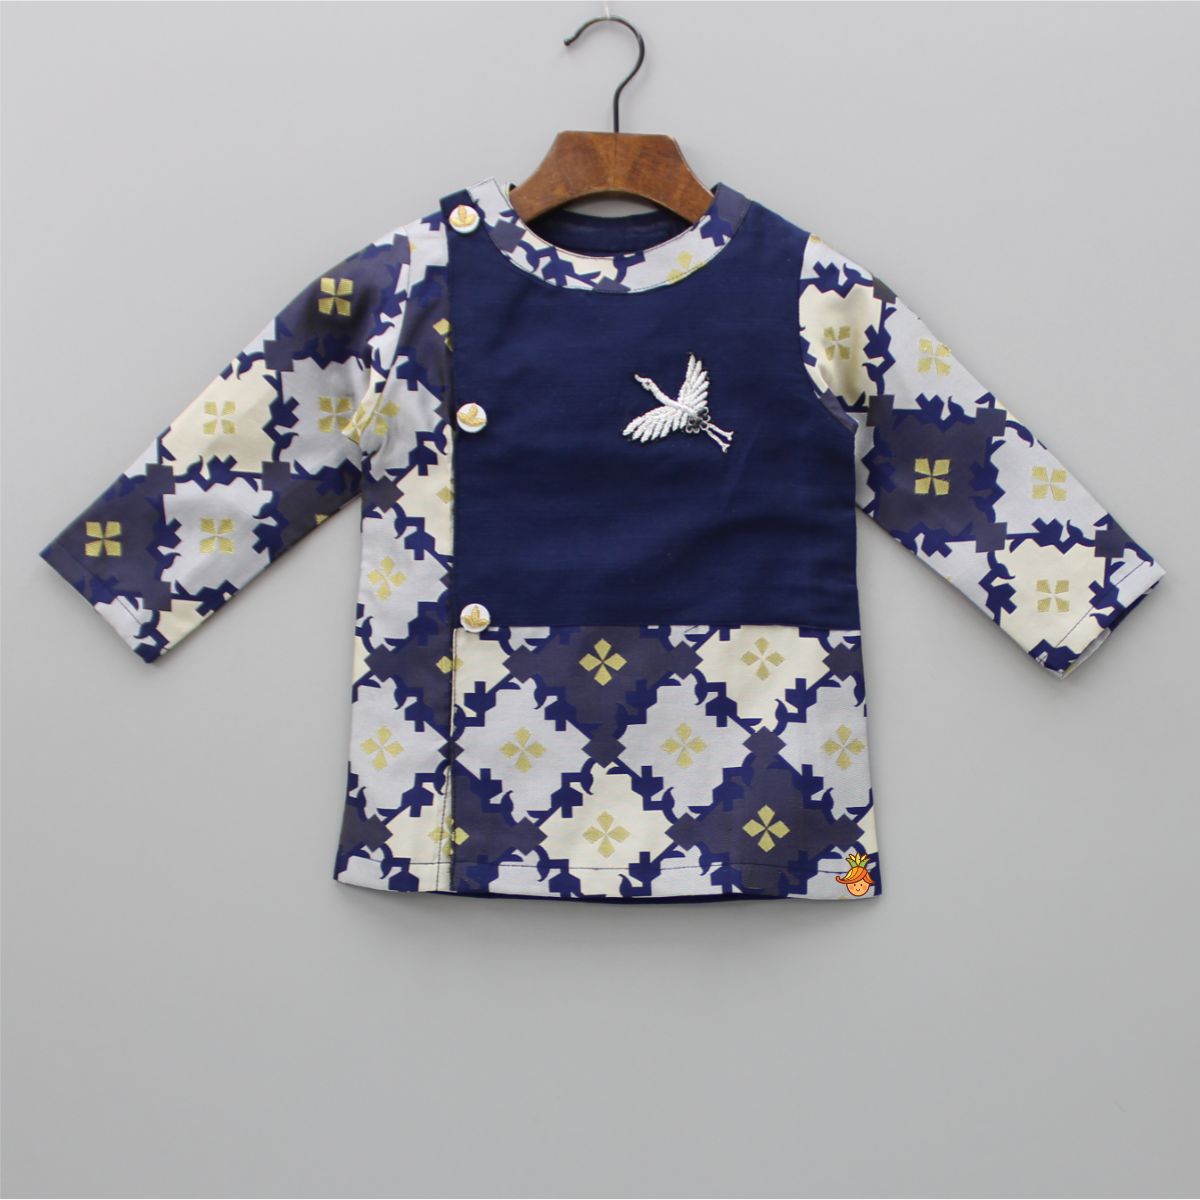 Pre Order: Bird Embroidered Front Open Navy Blue Kurta And Off White Pyjama